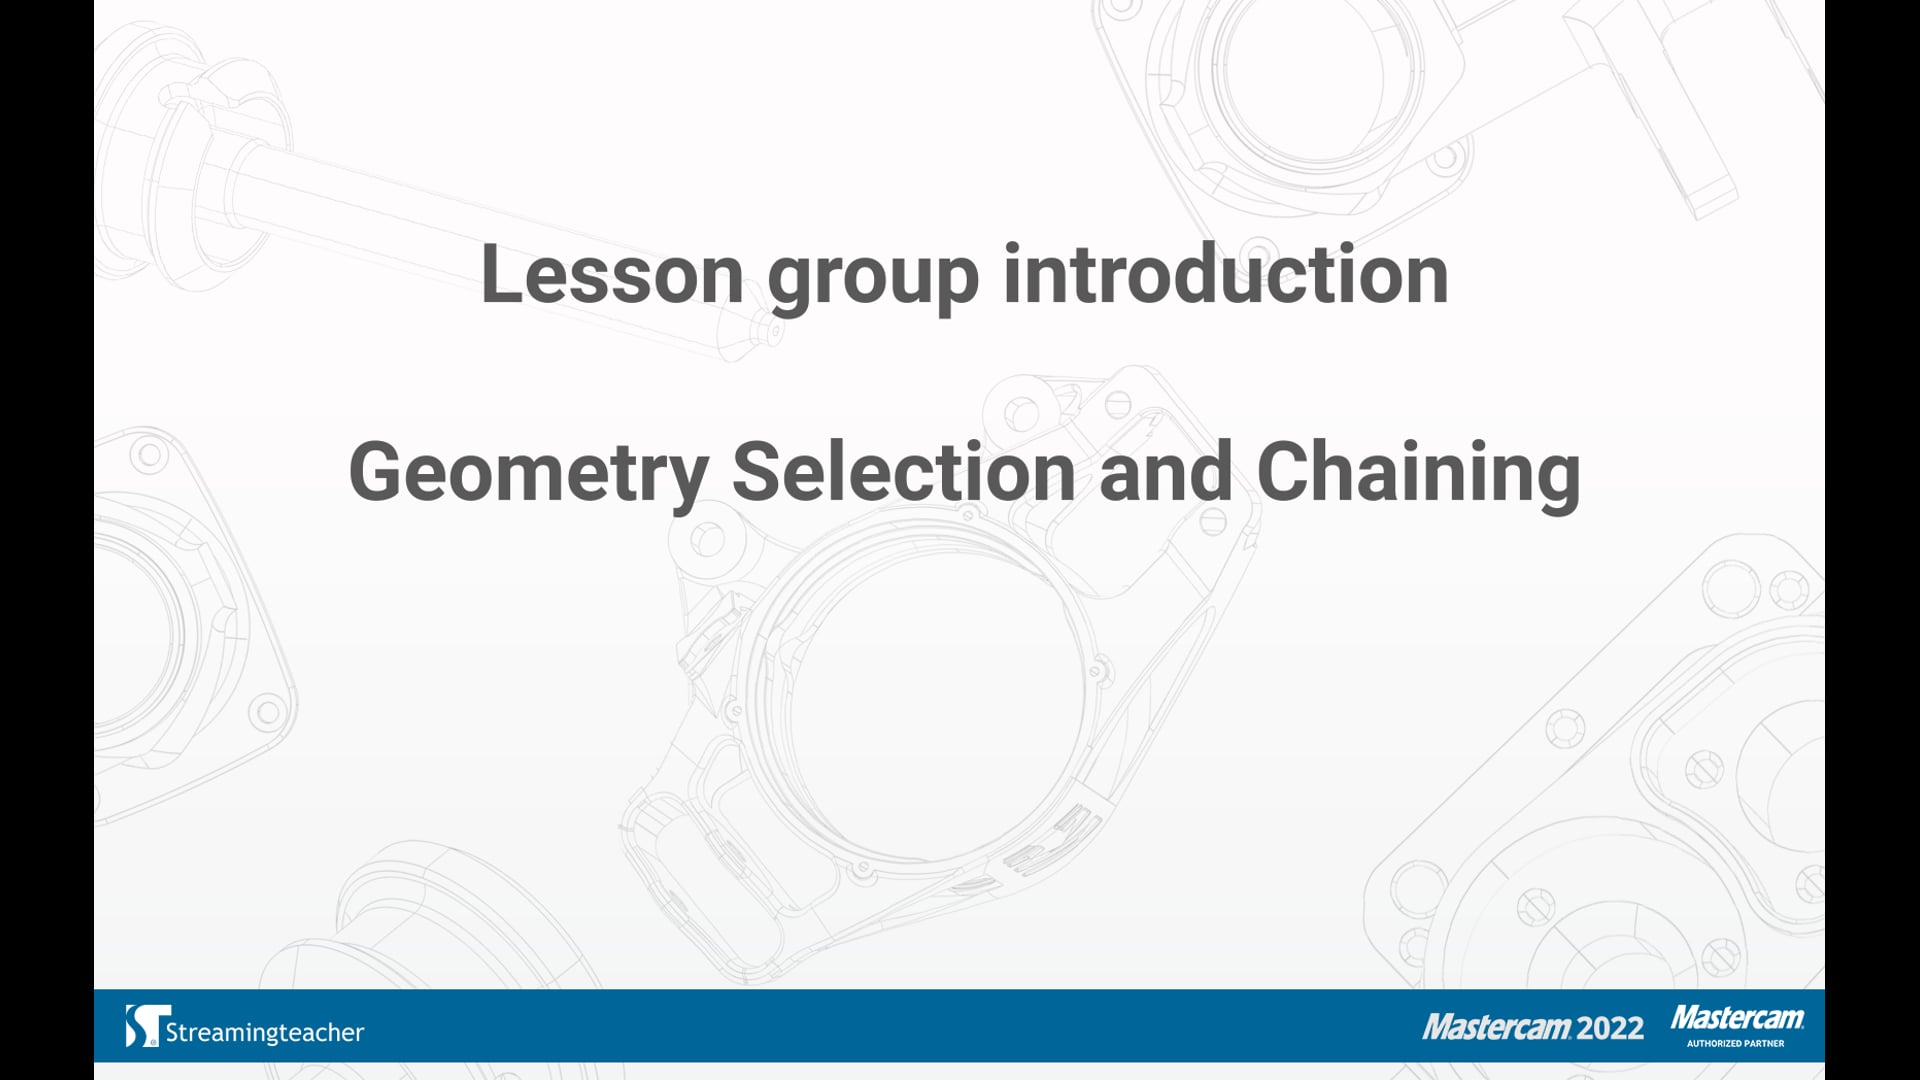 Geometry Selection and Chaining